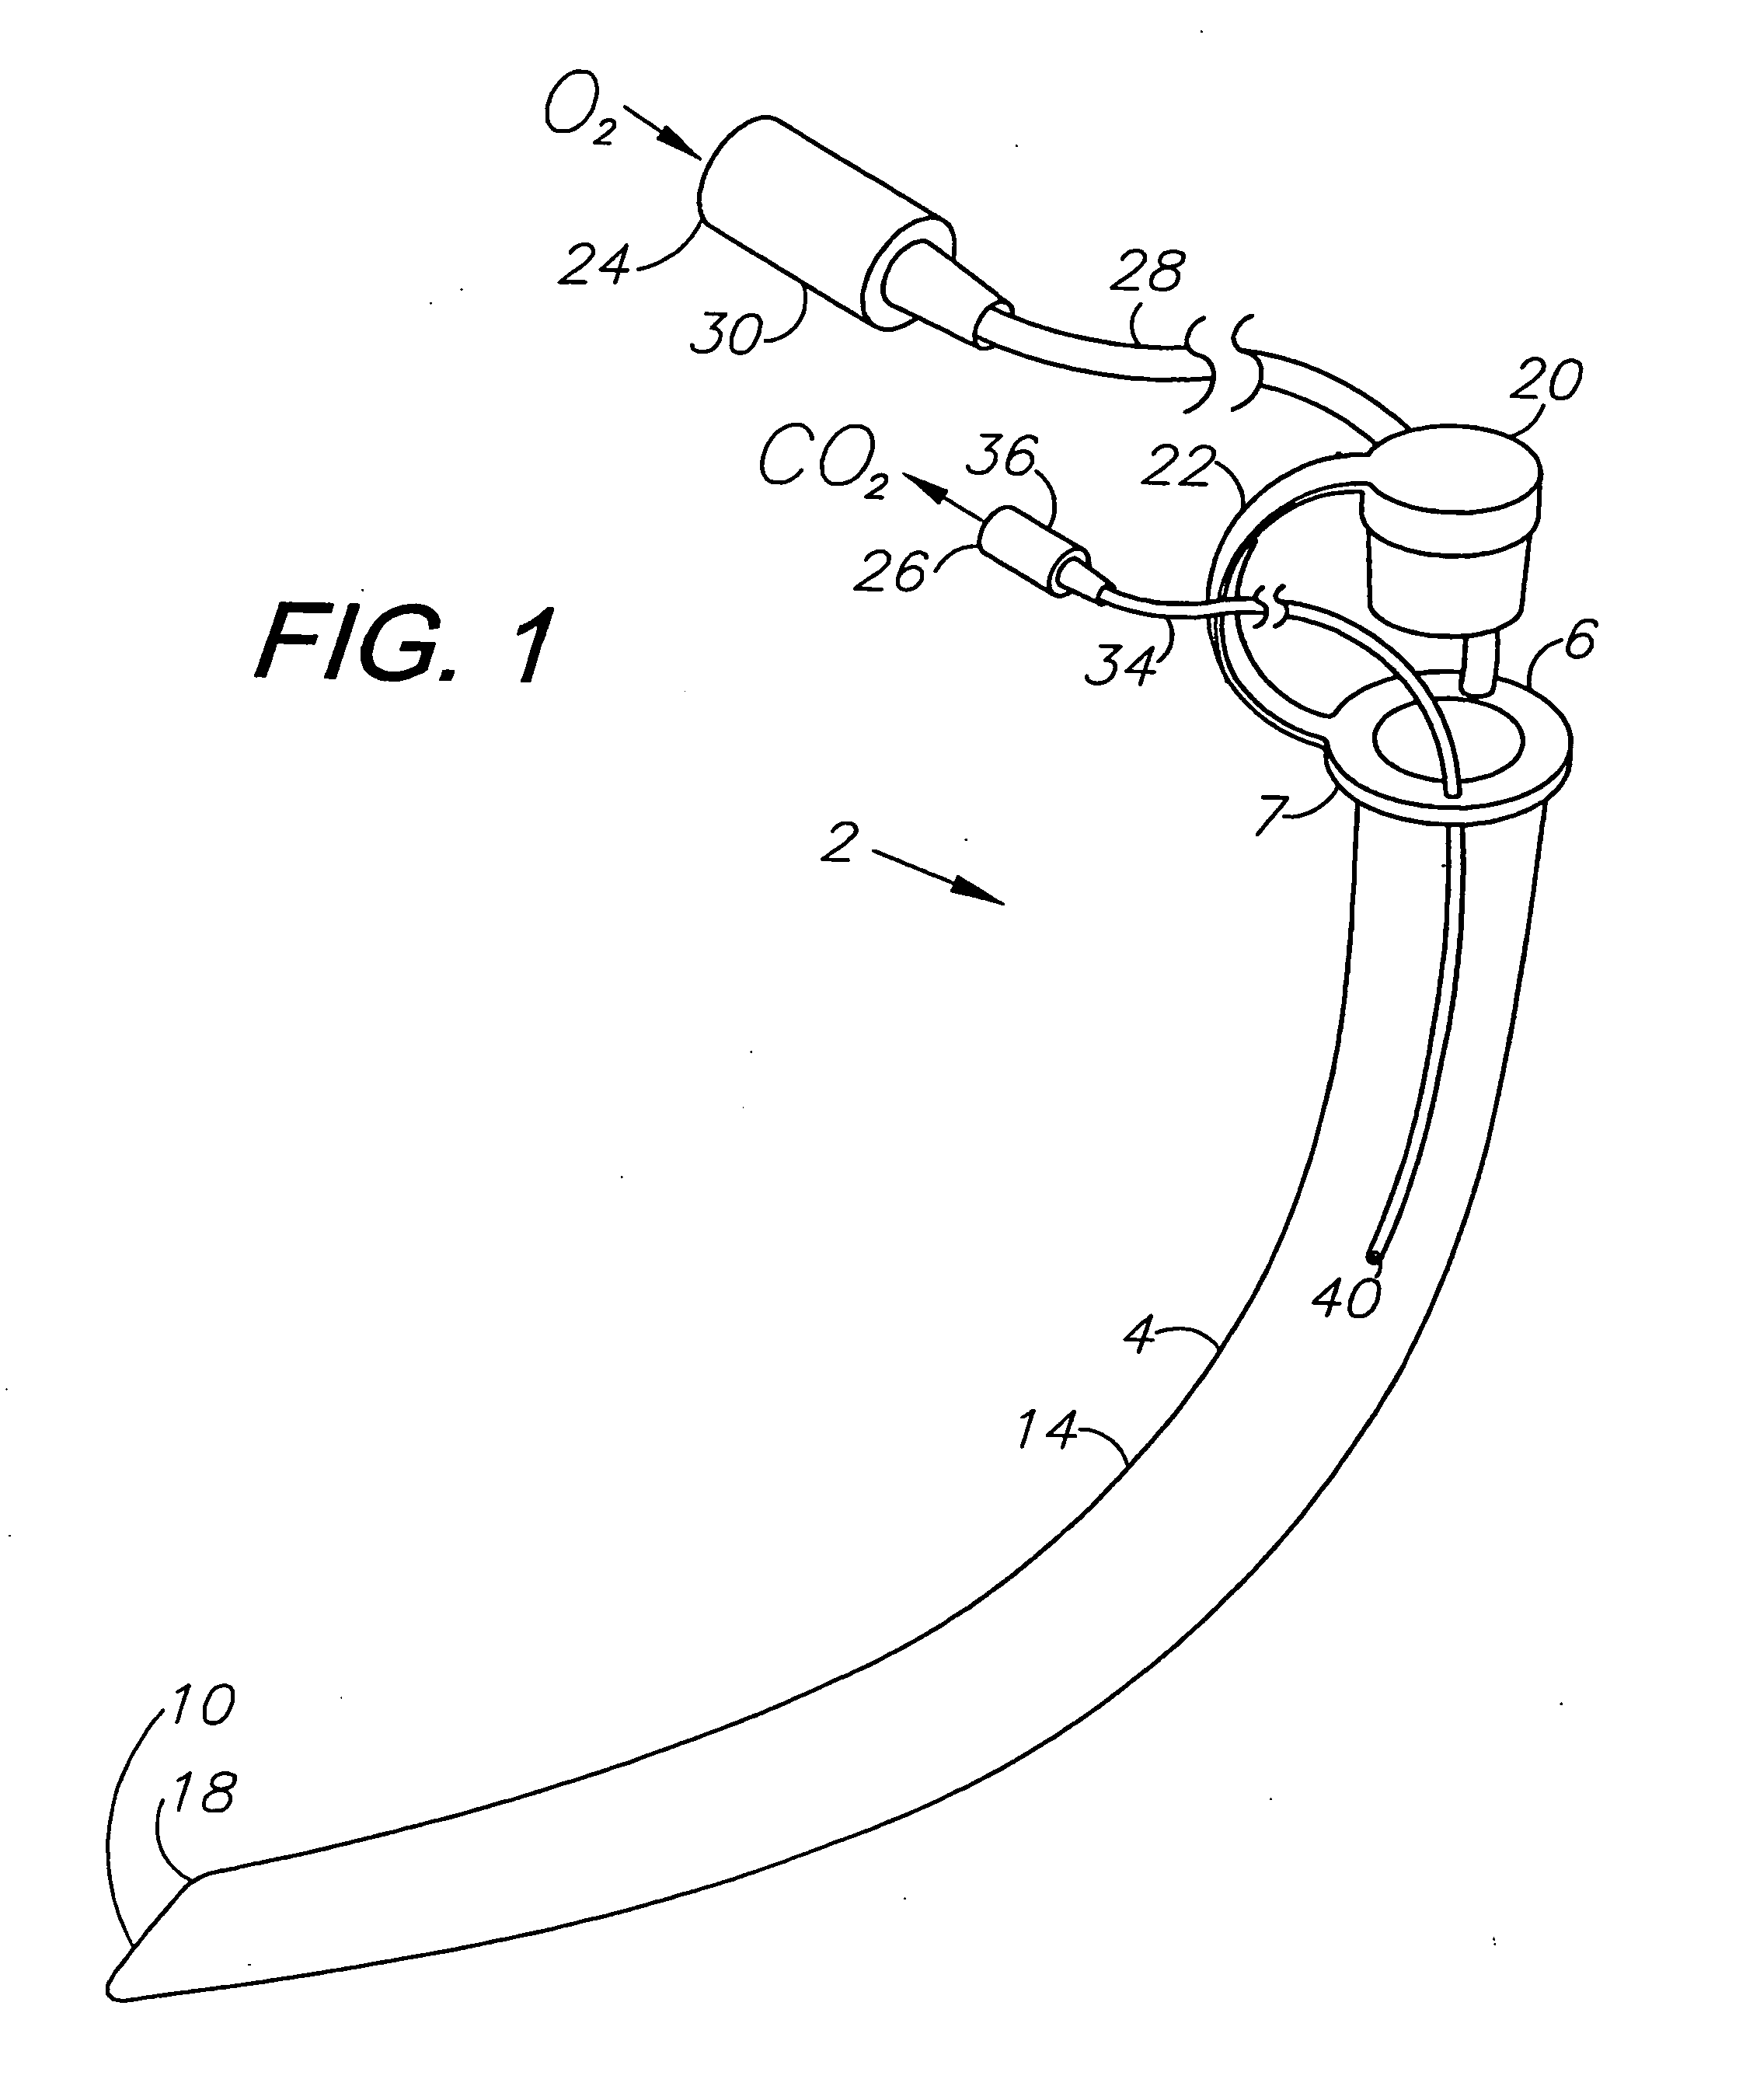 Esophageal intubation and airway management system and method